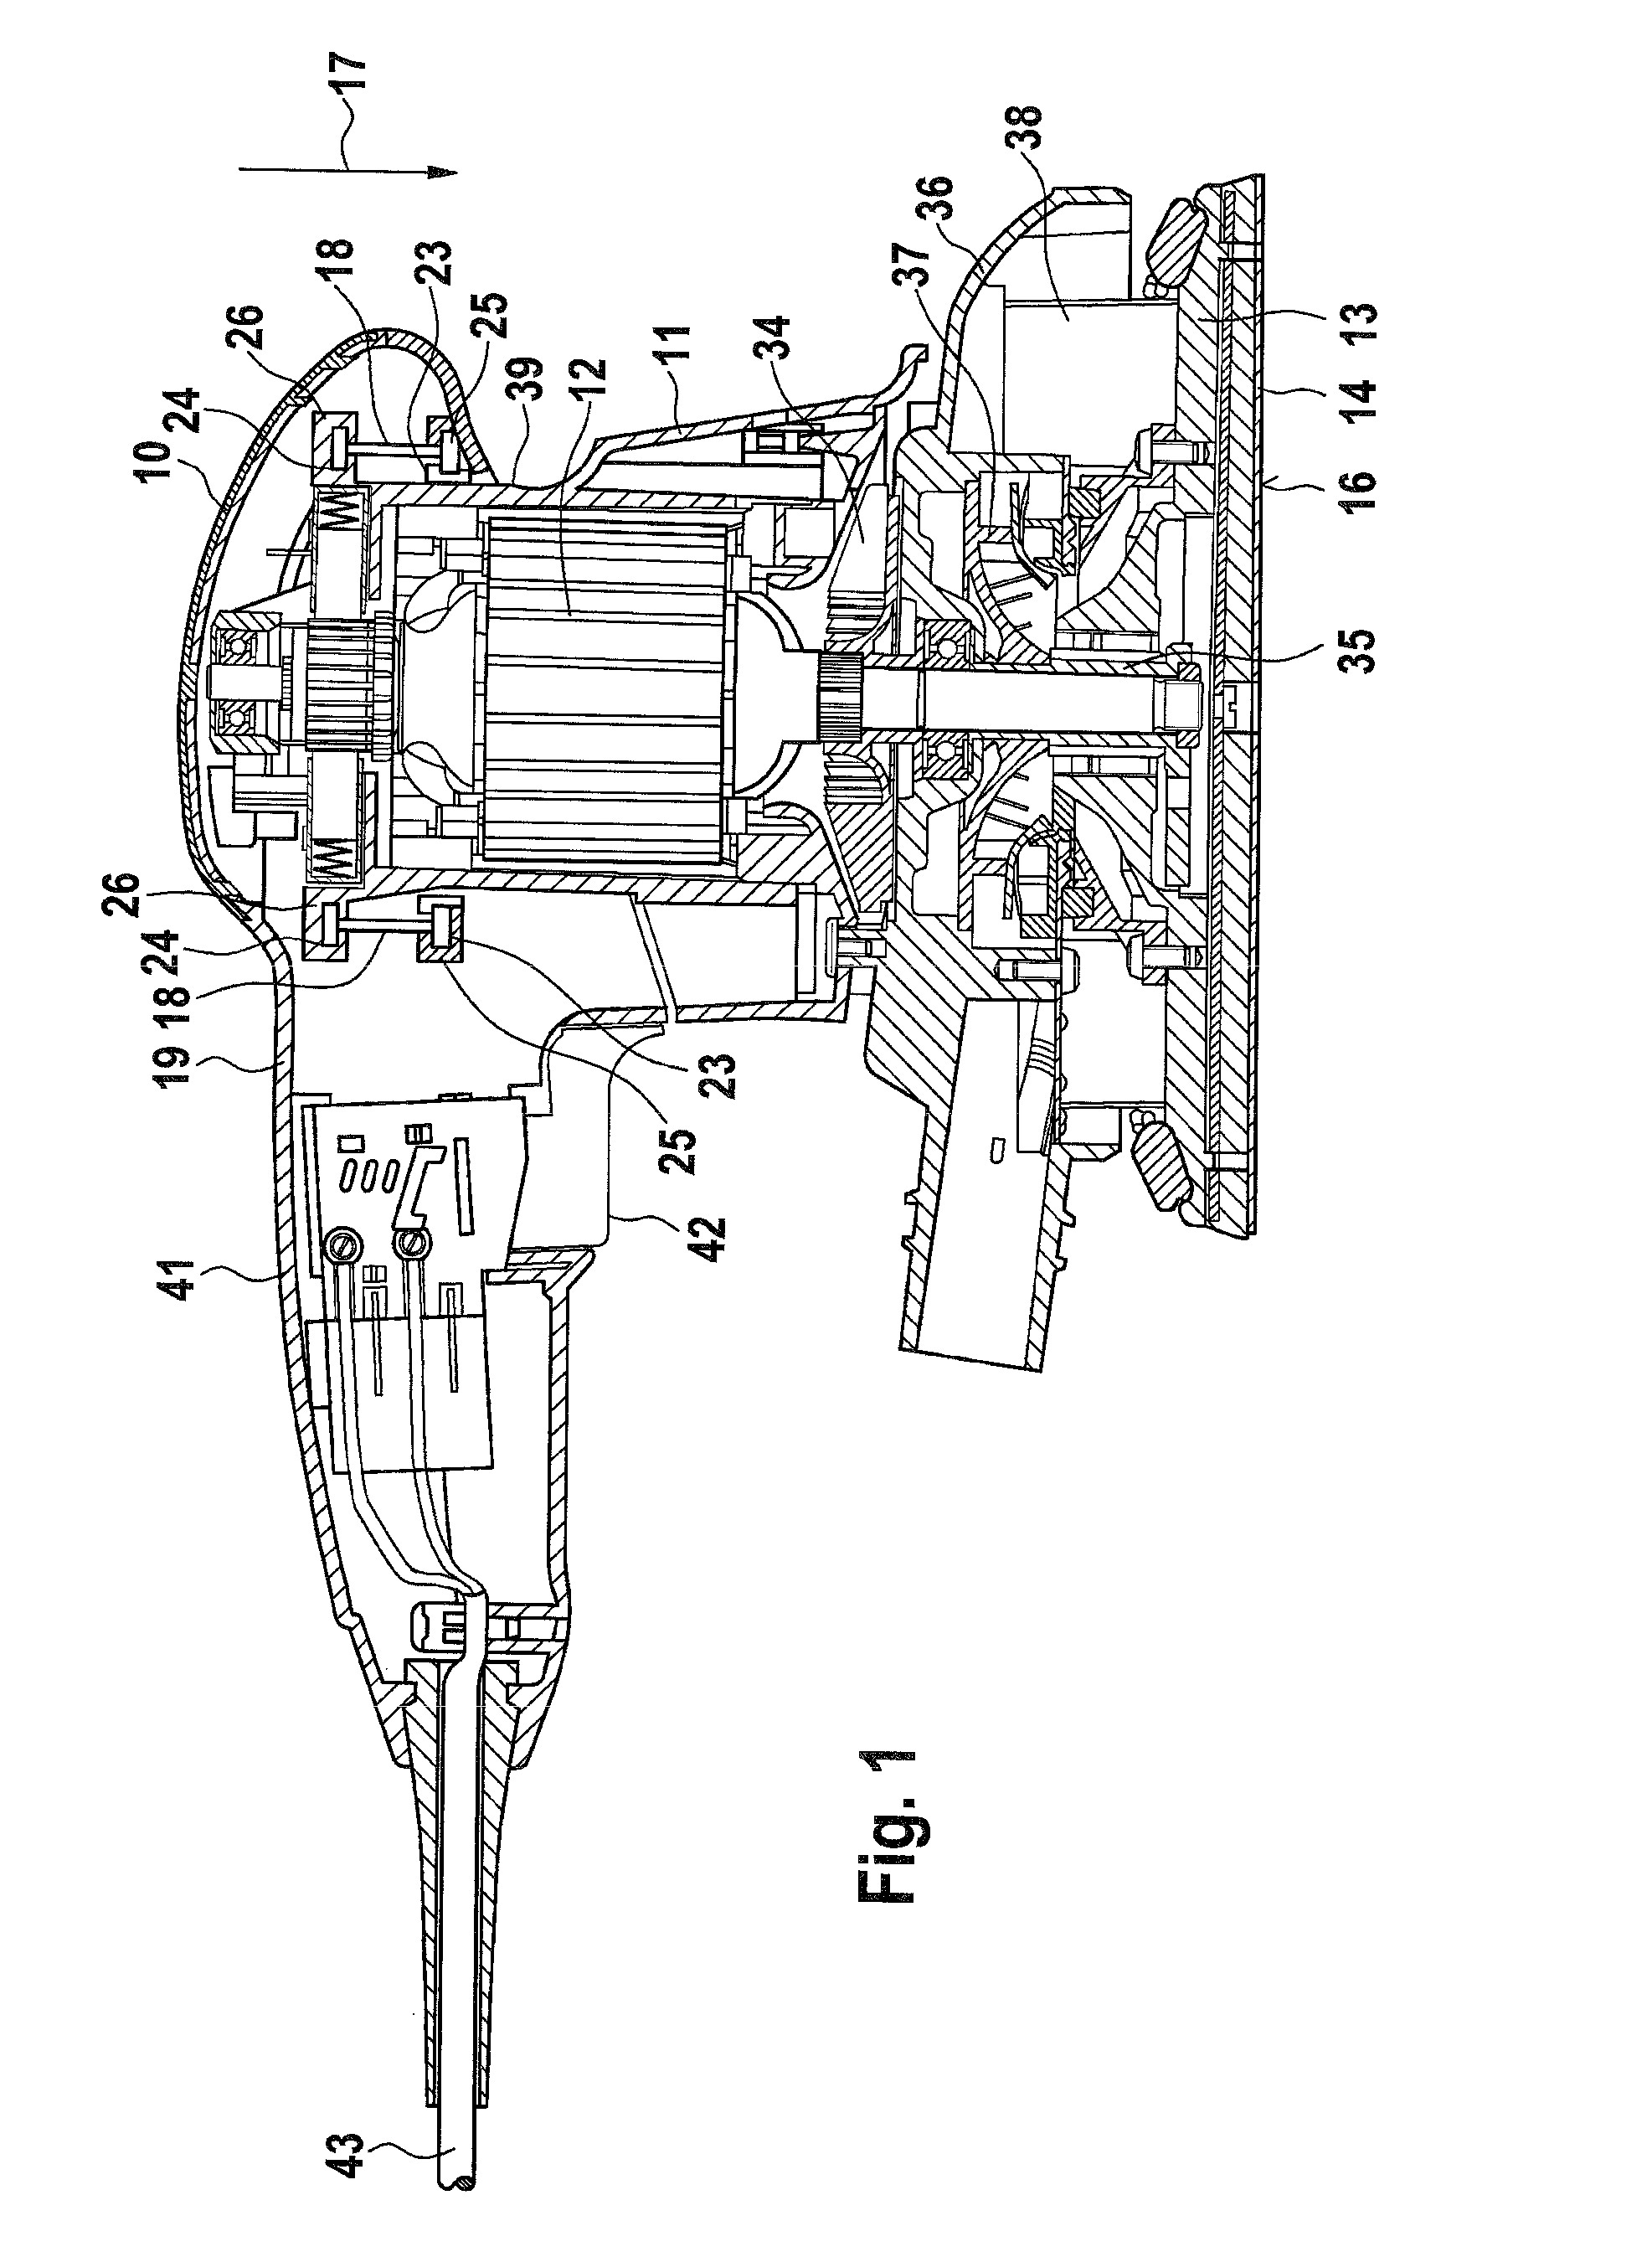 Manual power sander, and vibration isolation device of a manual power sander